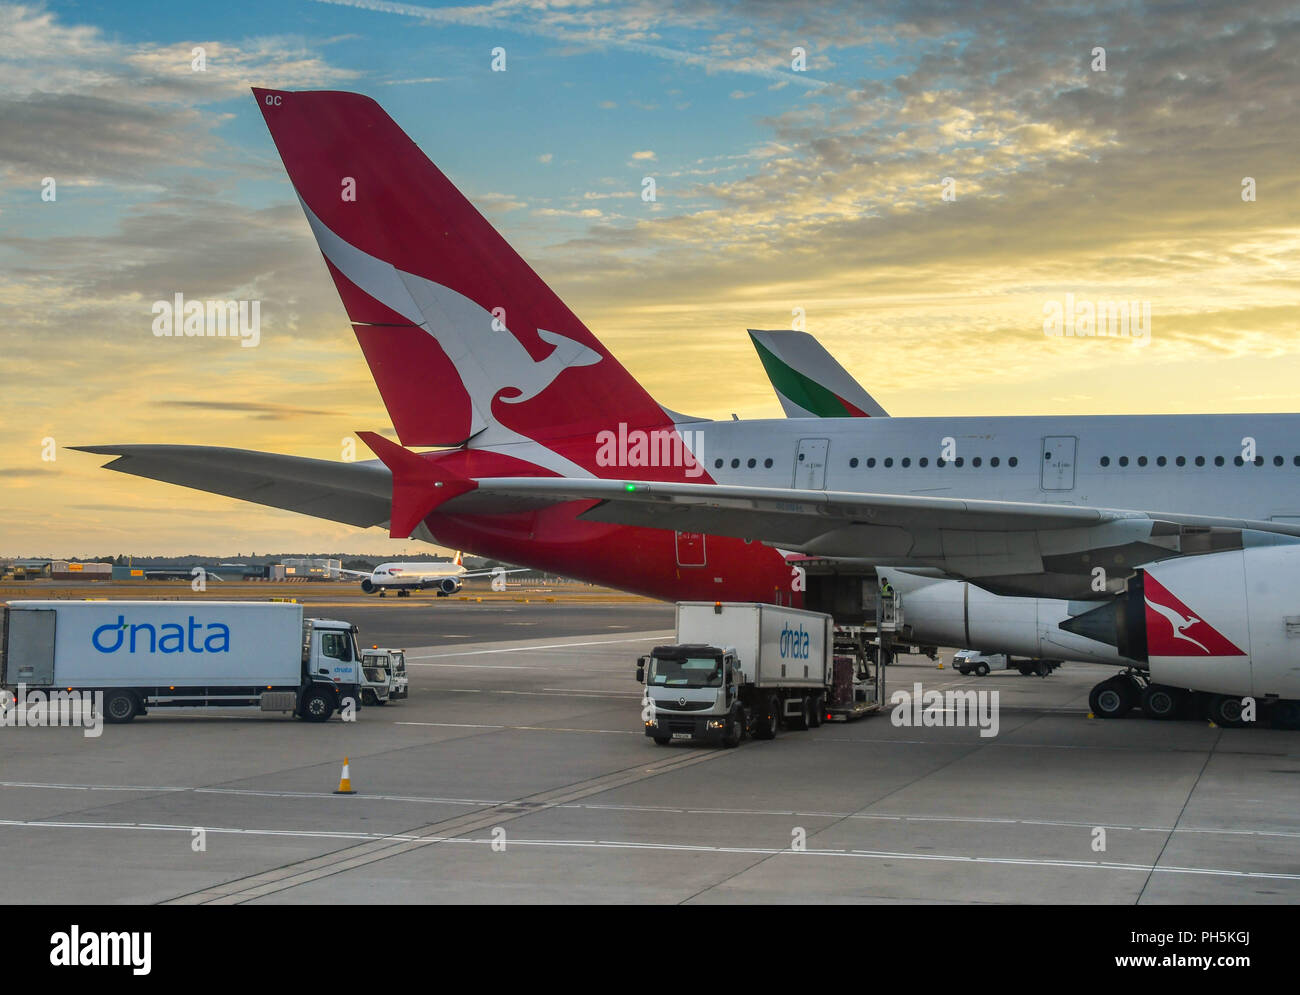 Tail fin of a Qantas Airbus A380 "super jumbo" jet at London Heathrow airport with a sunset sky. A truck is loading air freight into its hold. Stock Photo